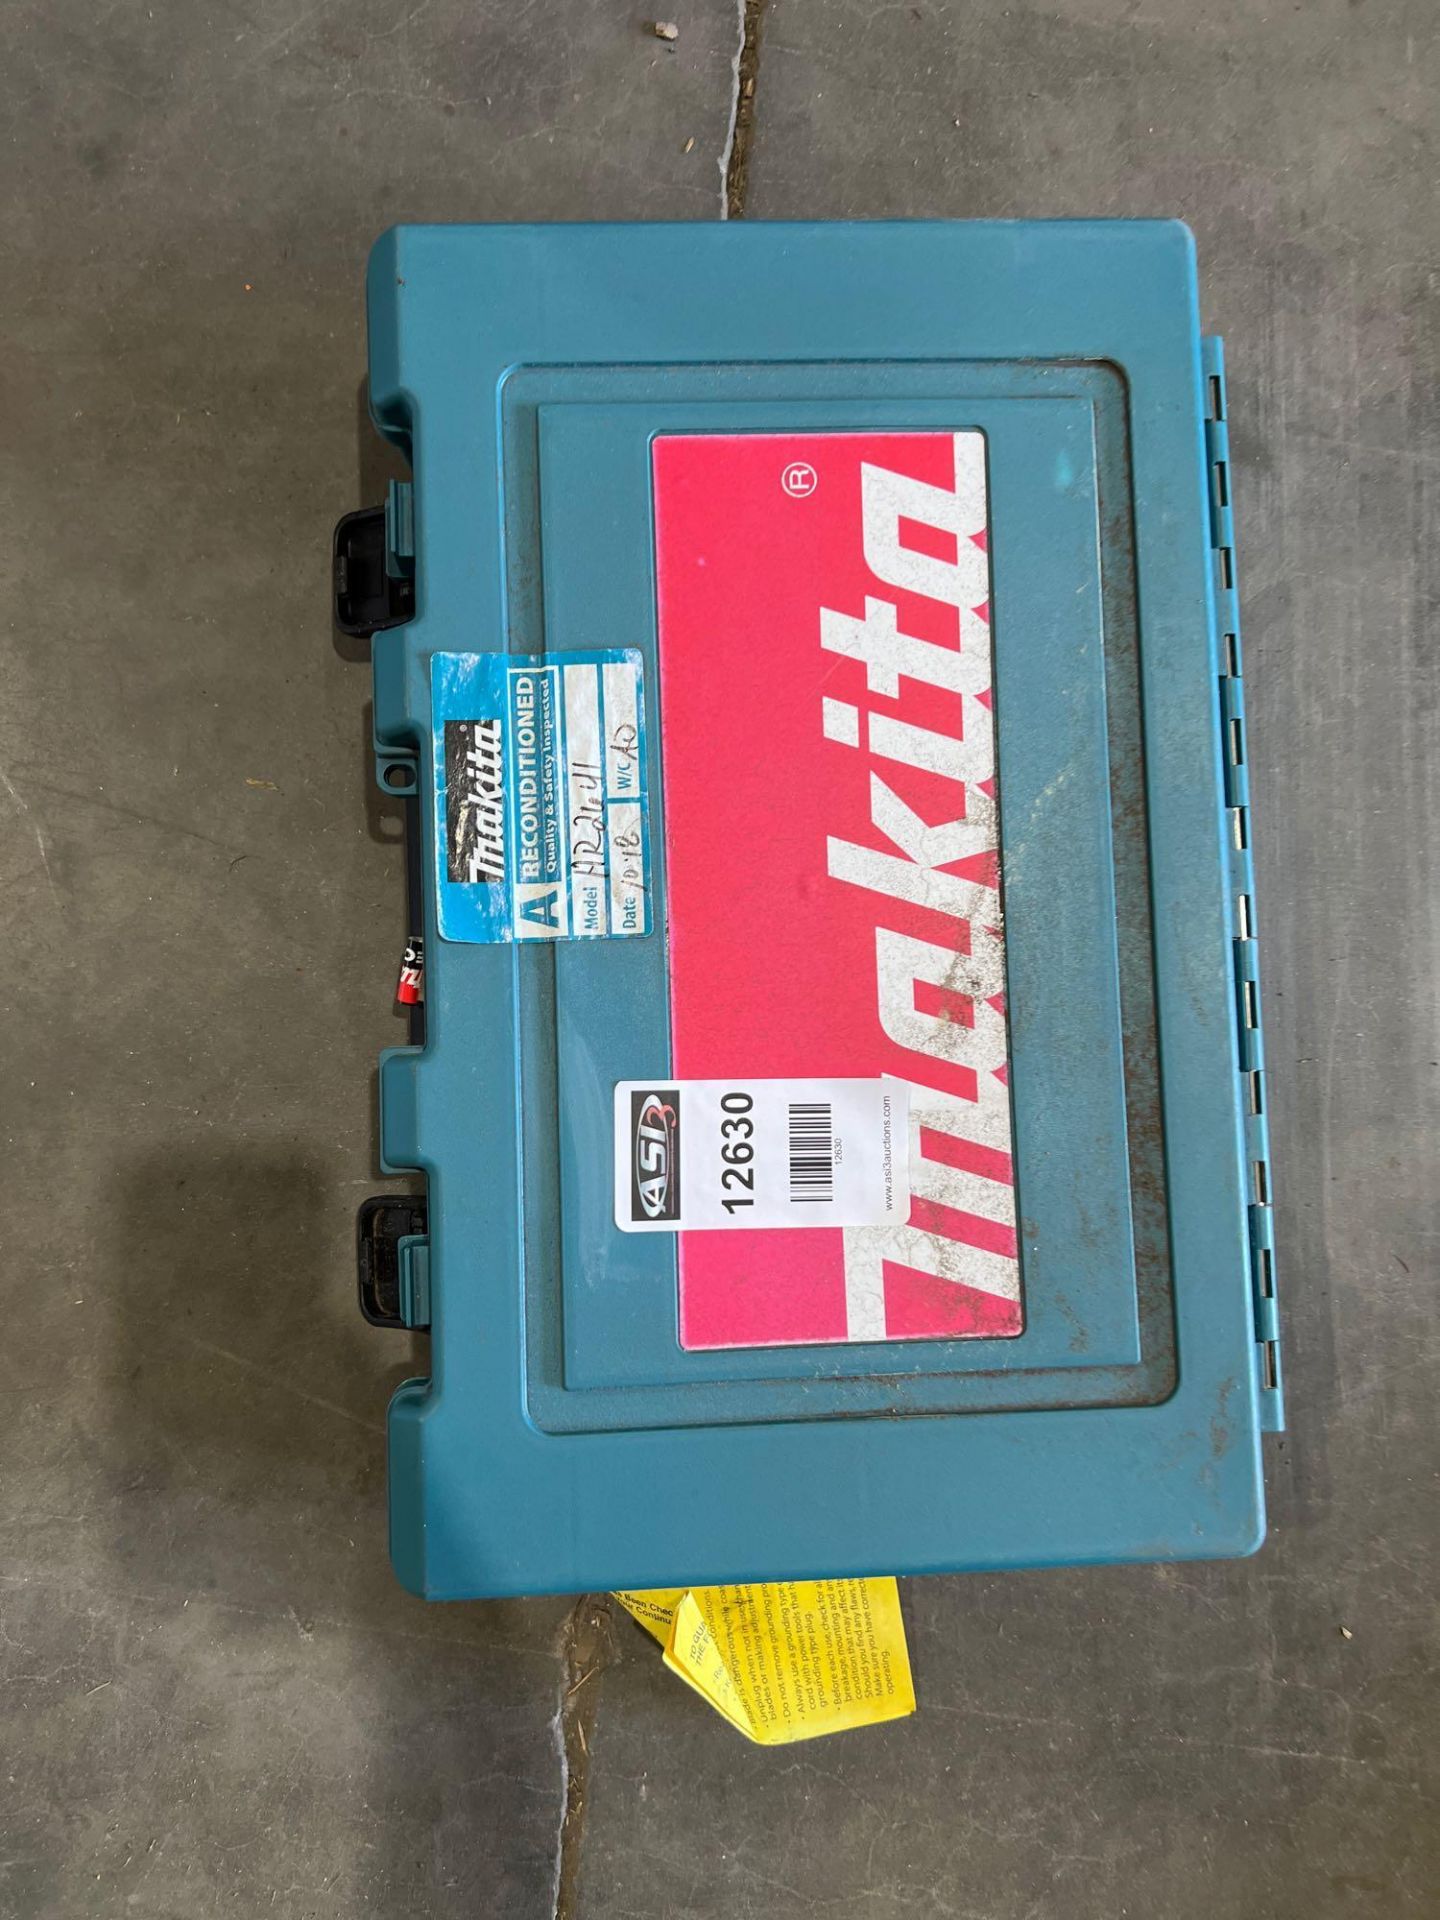 UNUSED MAKITA COMBINATION HAMMER DRILL WITH CARRY CASE - Image 3 of 3